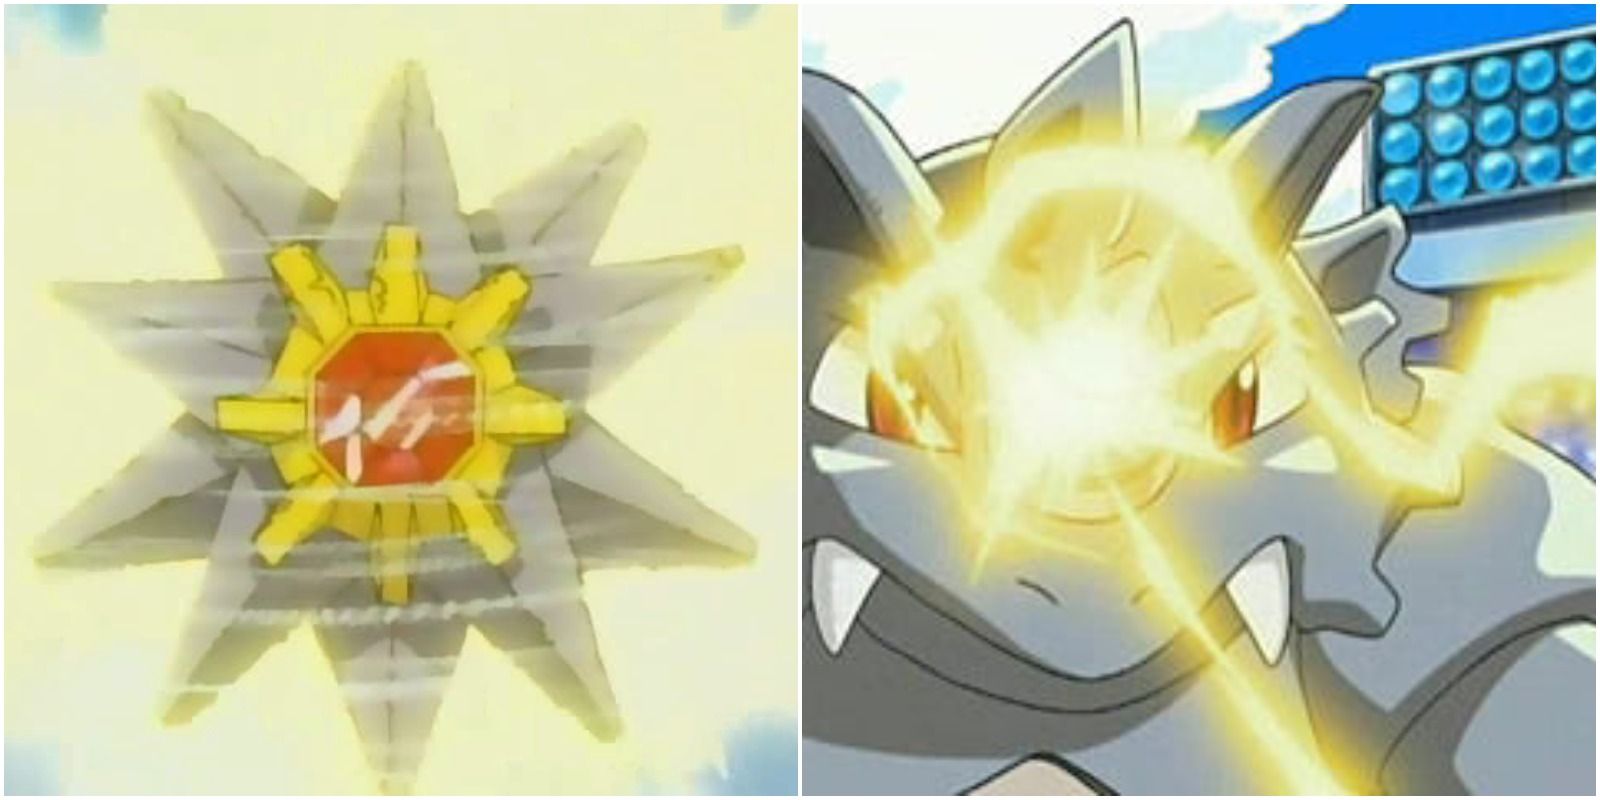 starmie on left and rhydon on right using electric type attacks.